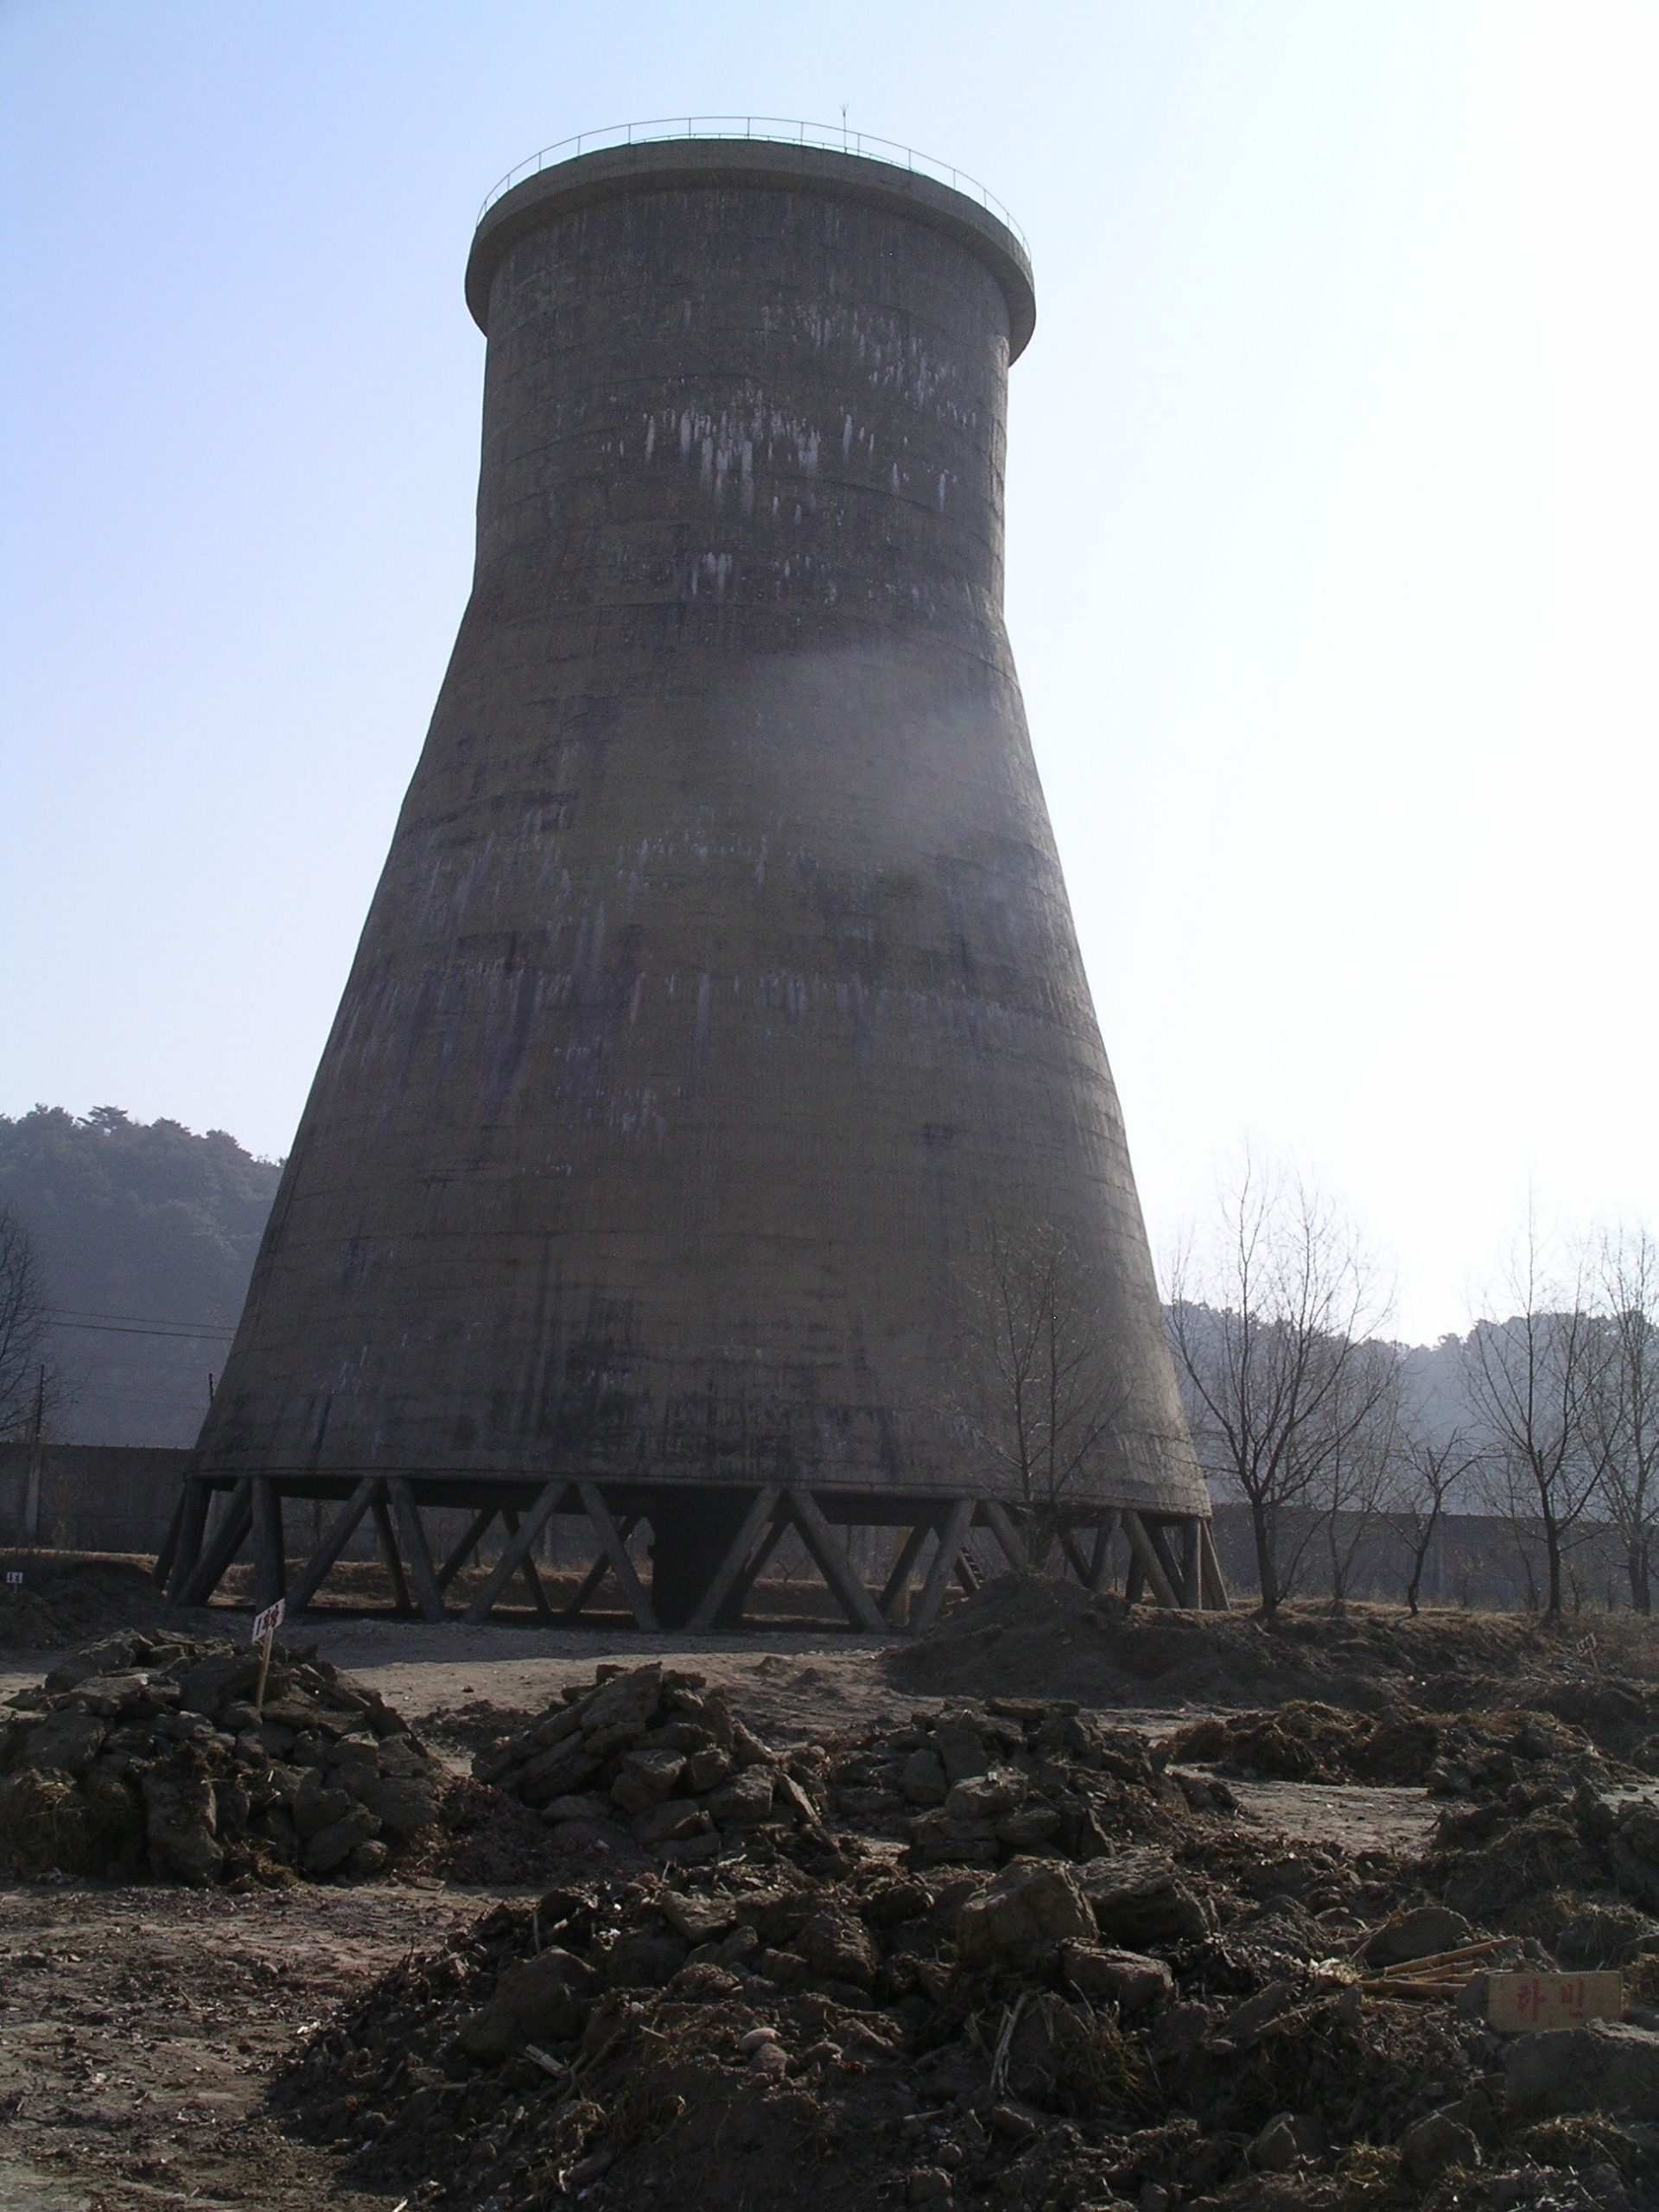 A reverted funnel-shaped cooling tower